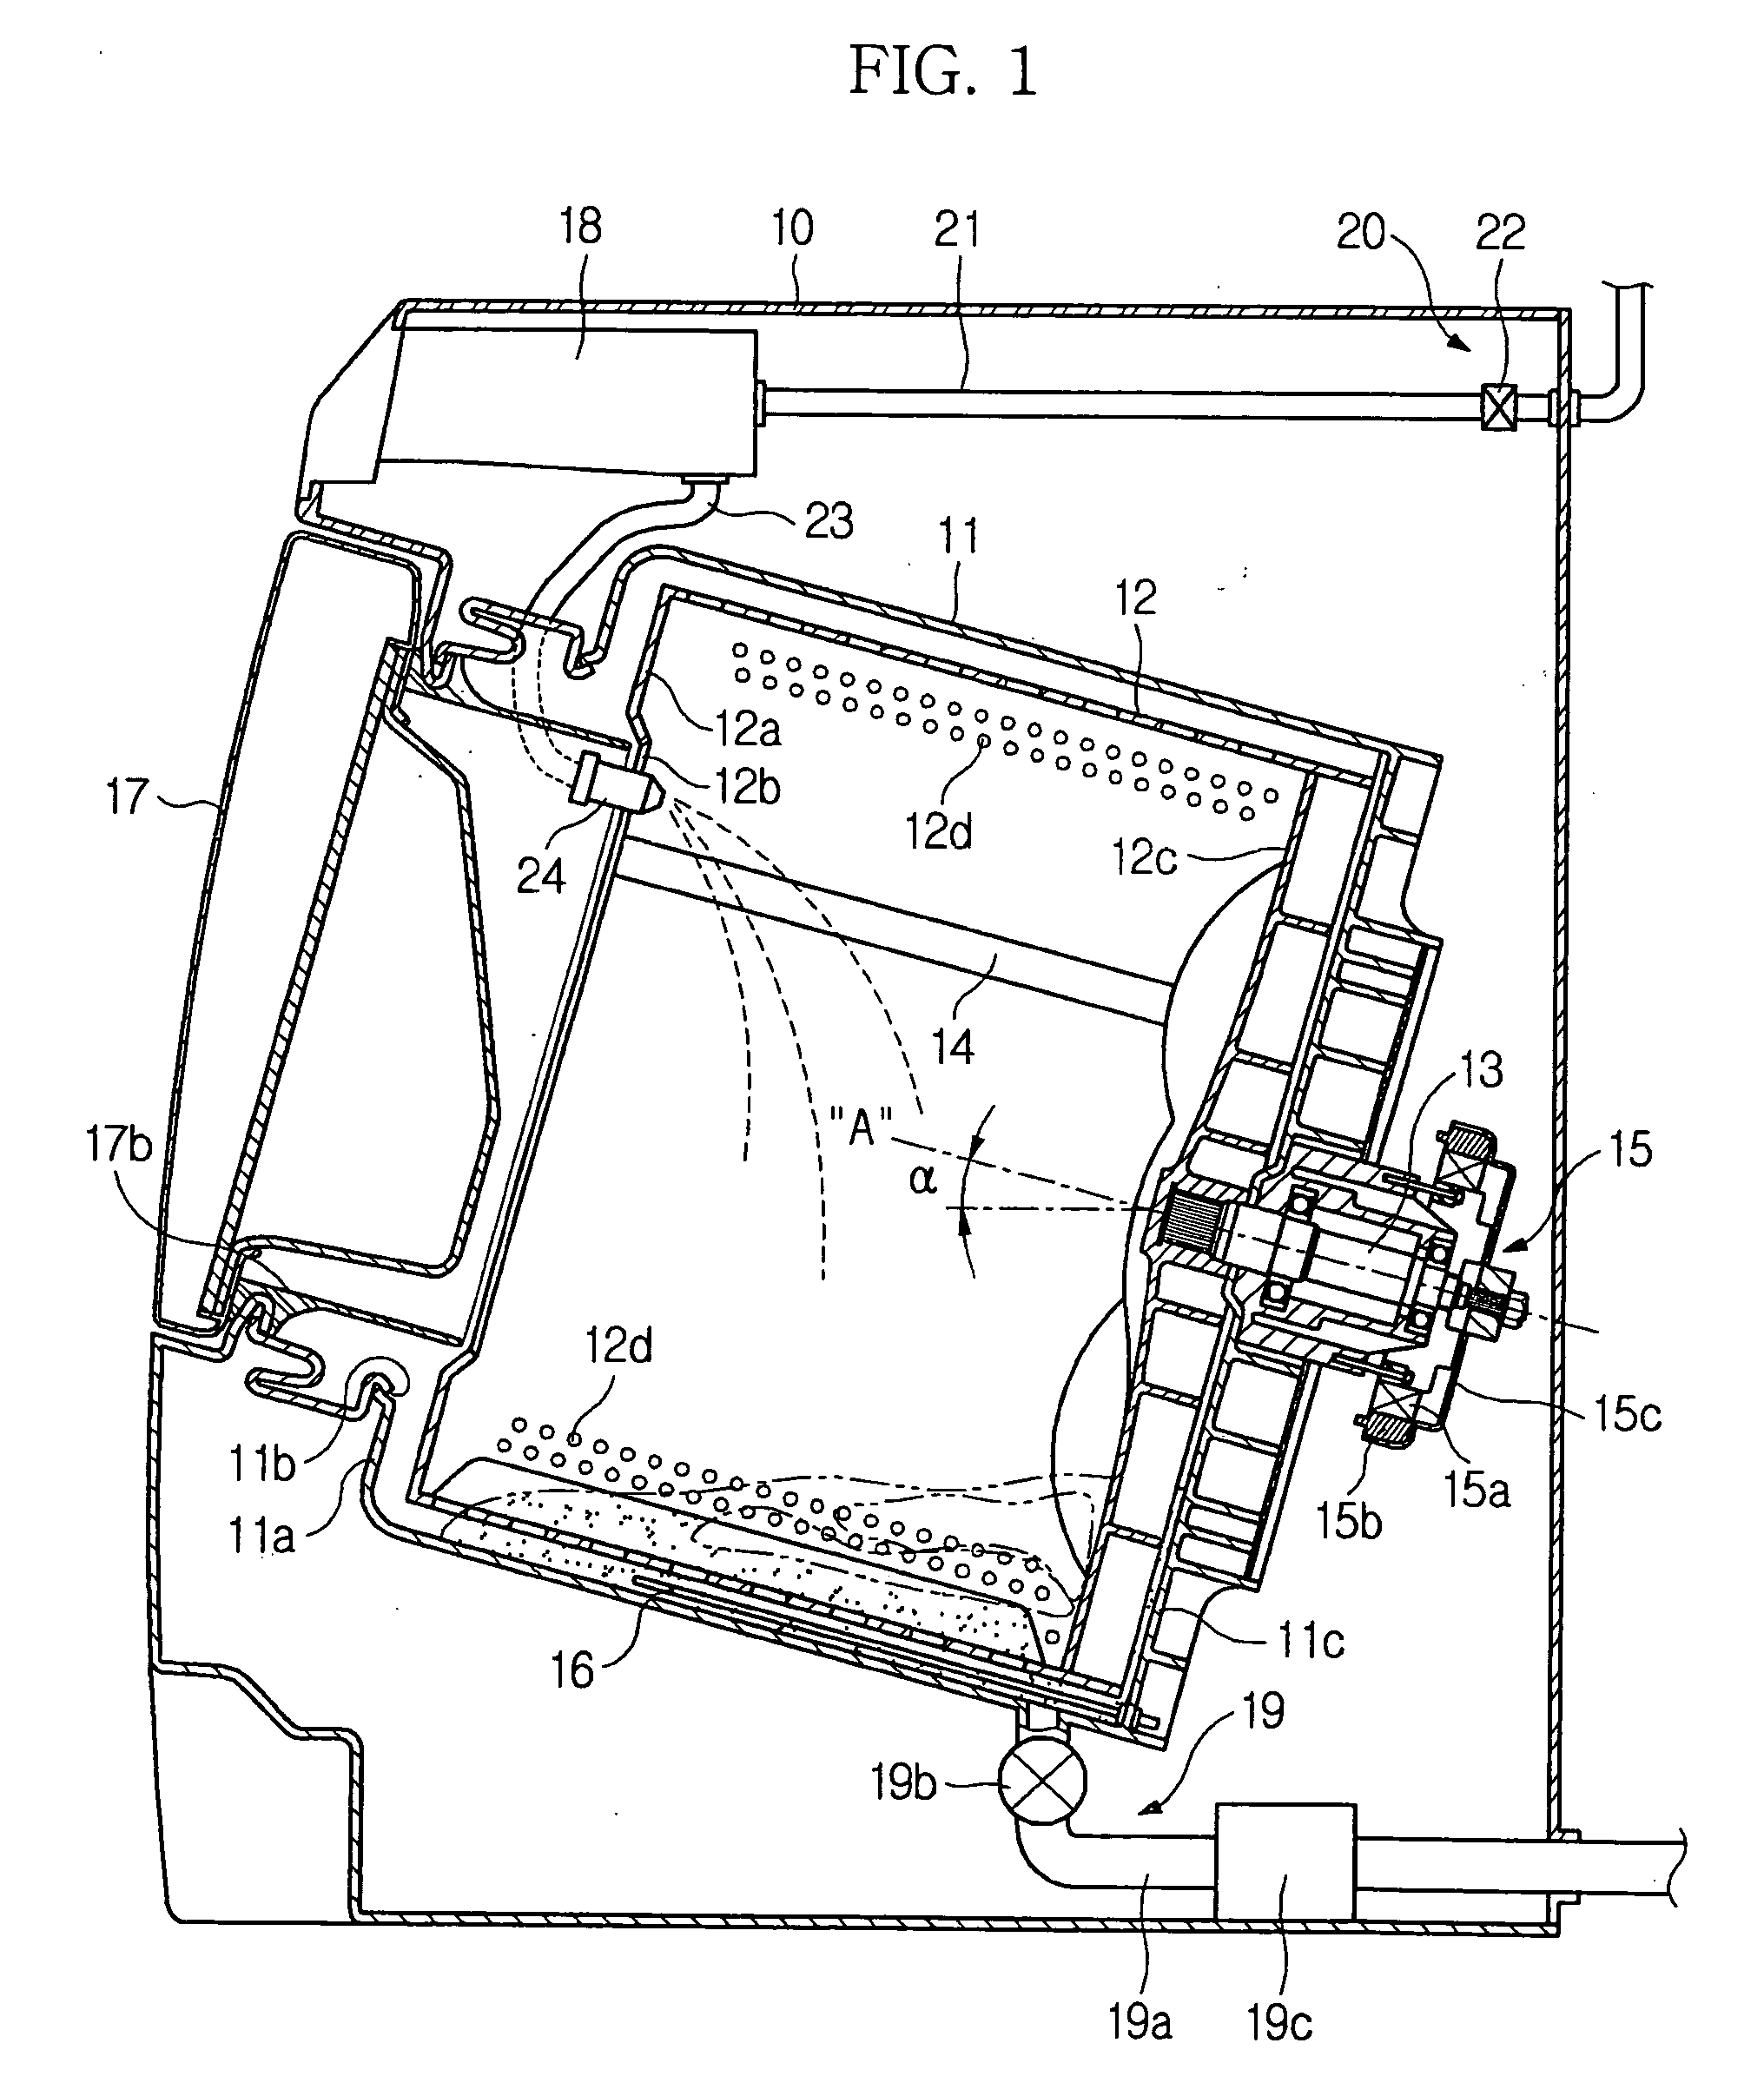 Washing machine and suds removal method thereof